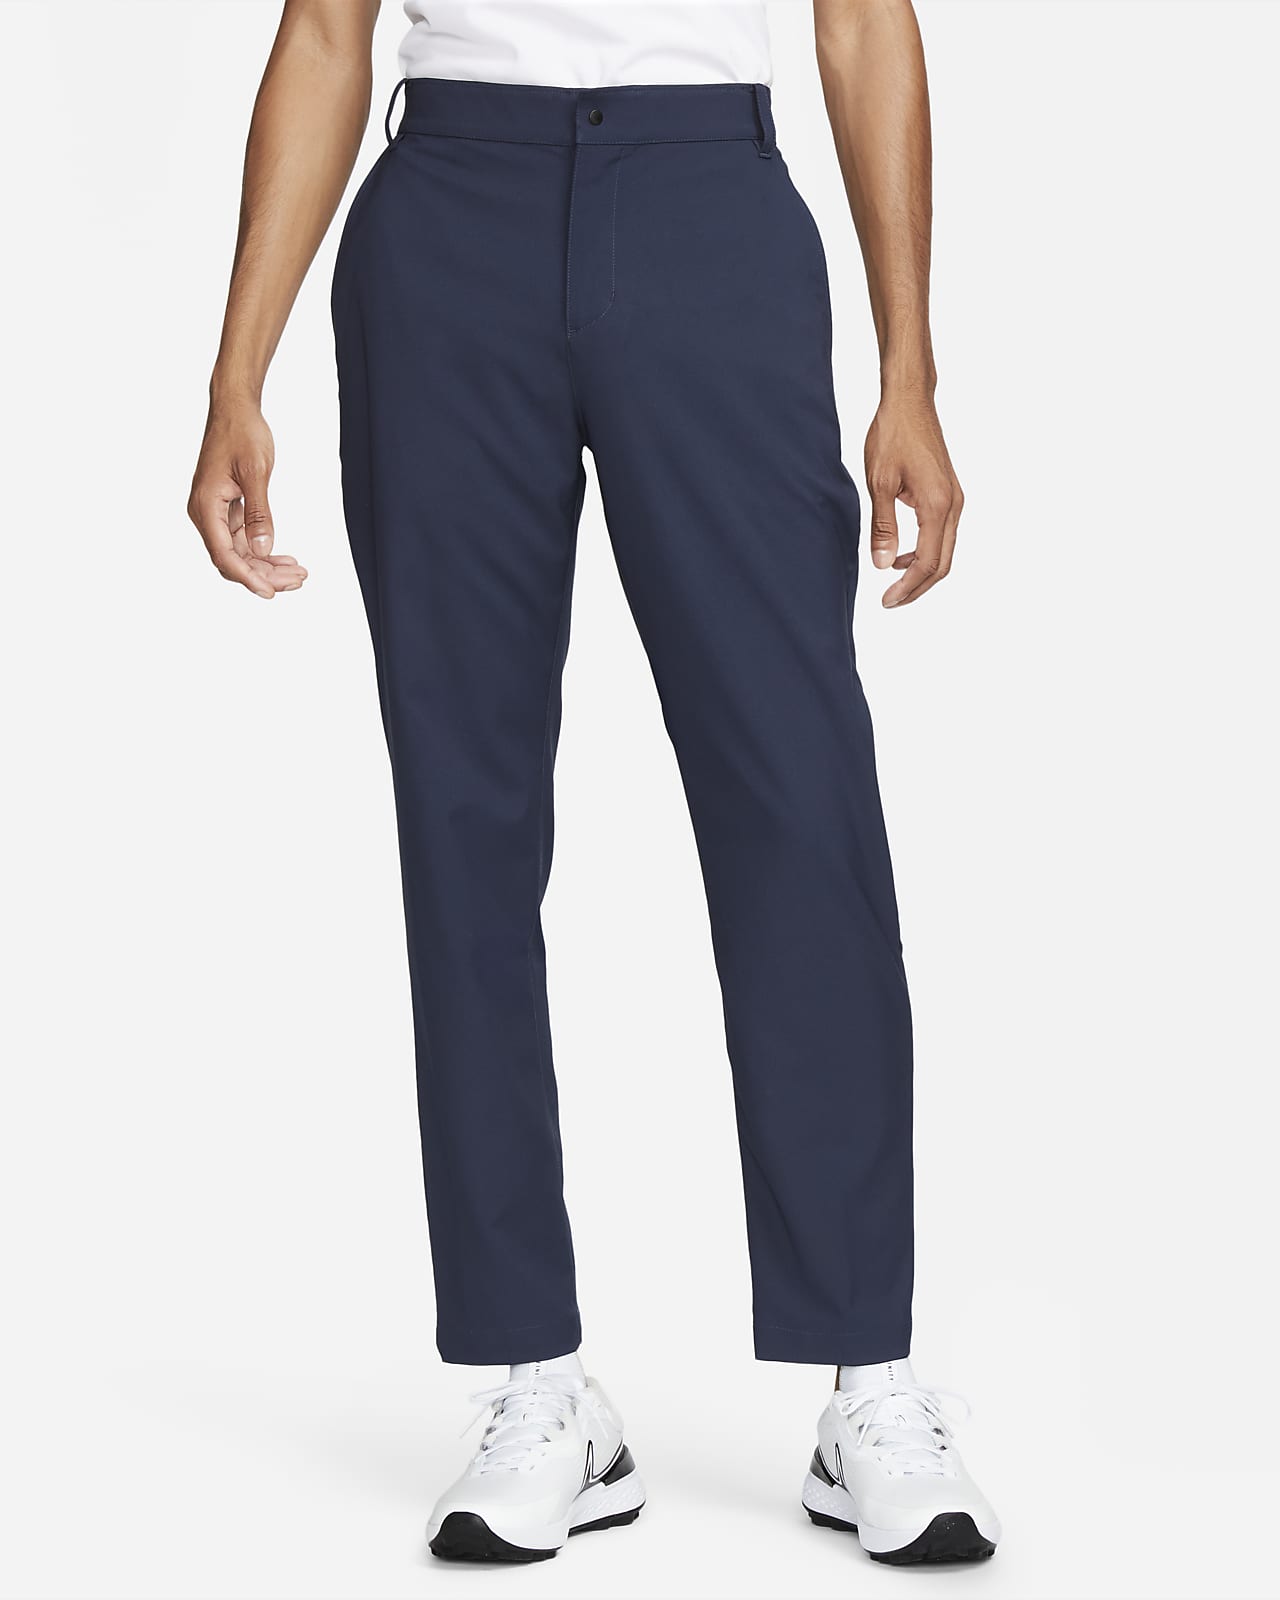 Commission Relaxed-Tapered Golf Pant 30